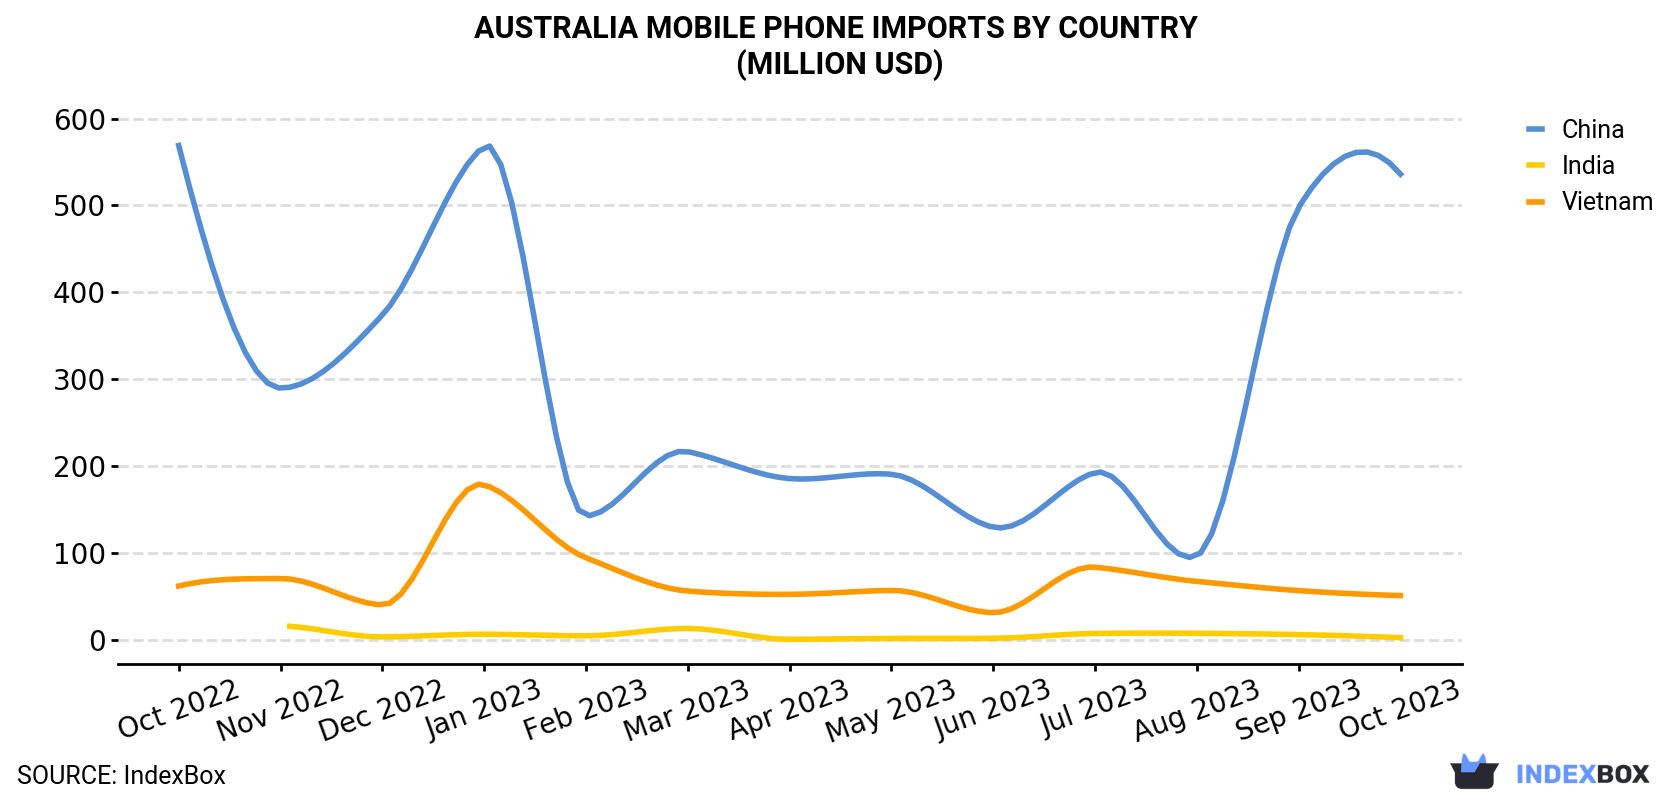 Australia Mobile Phone Imports By Country (Million USD)